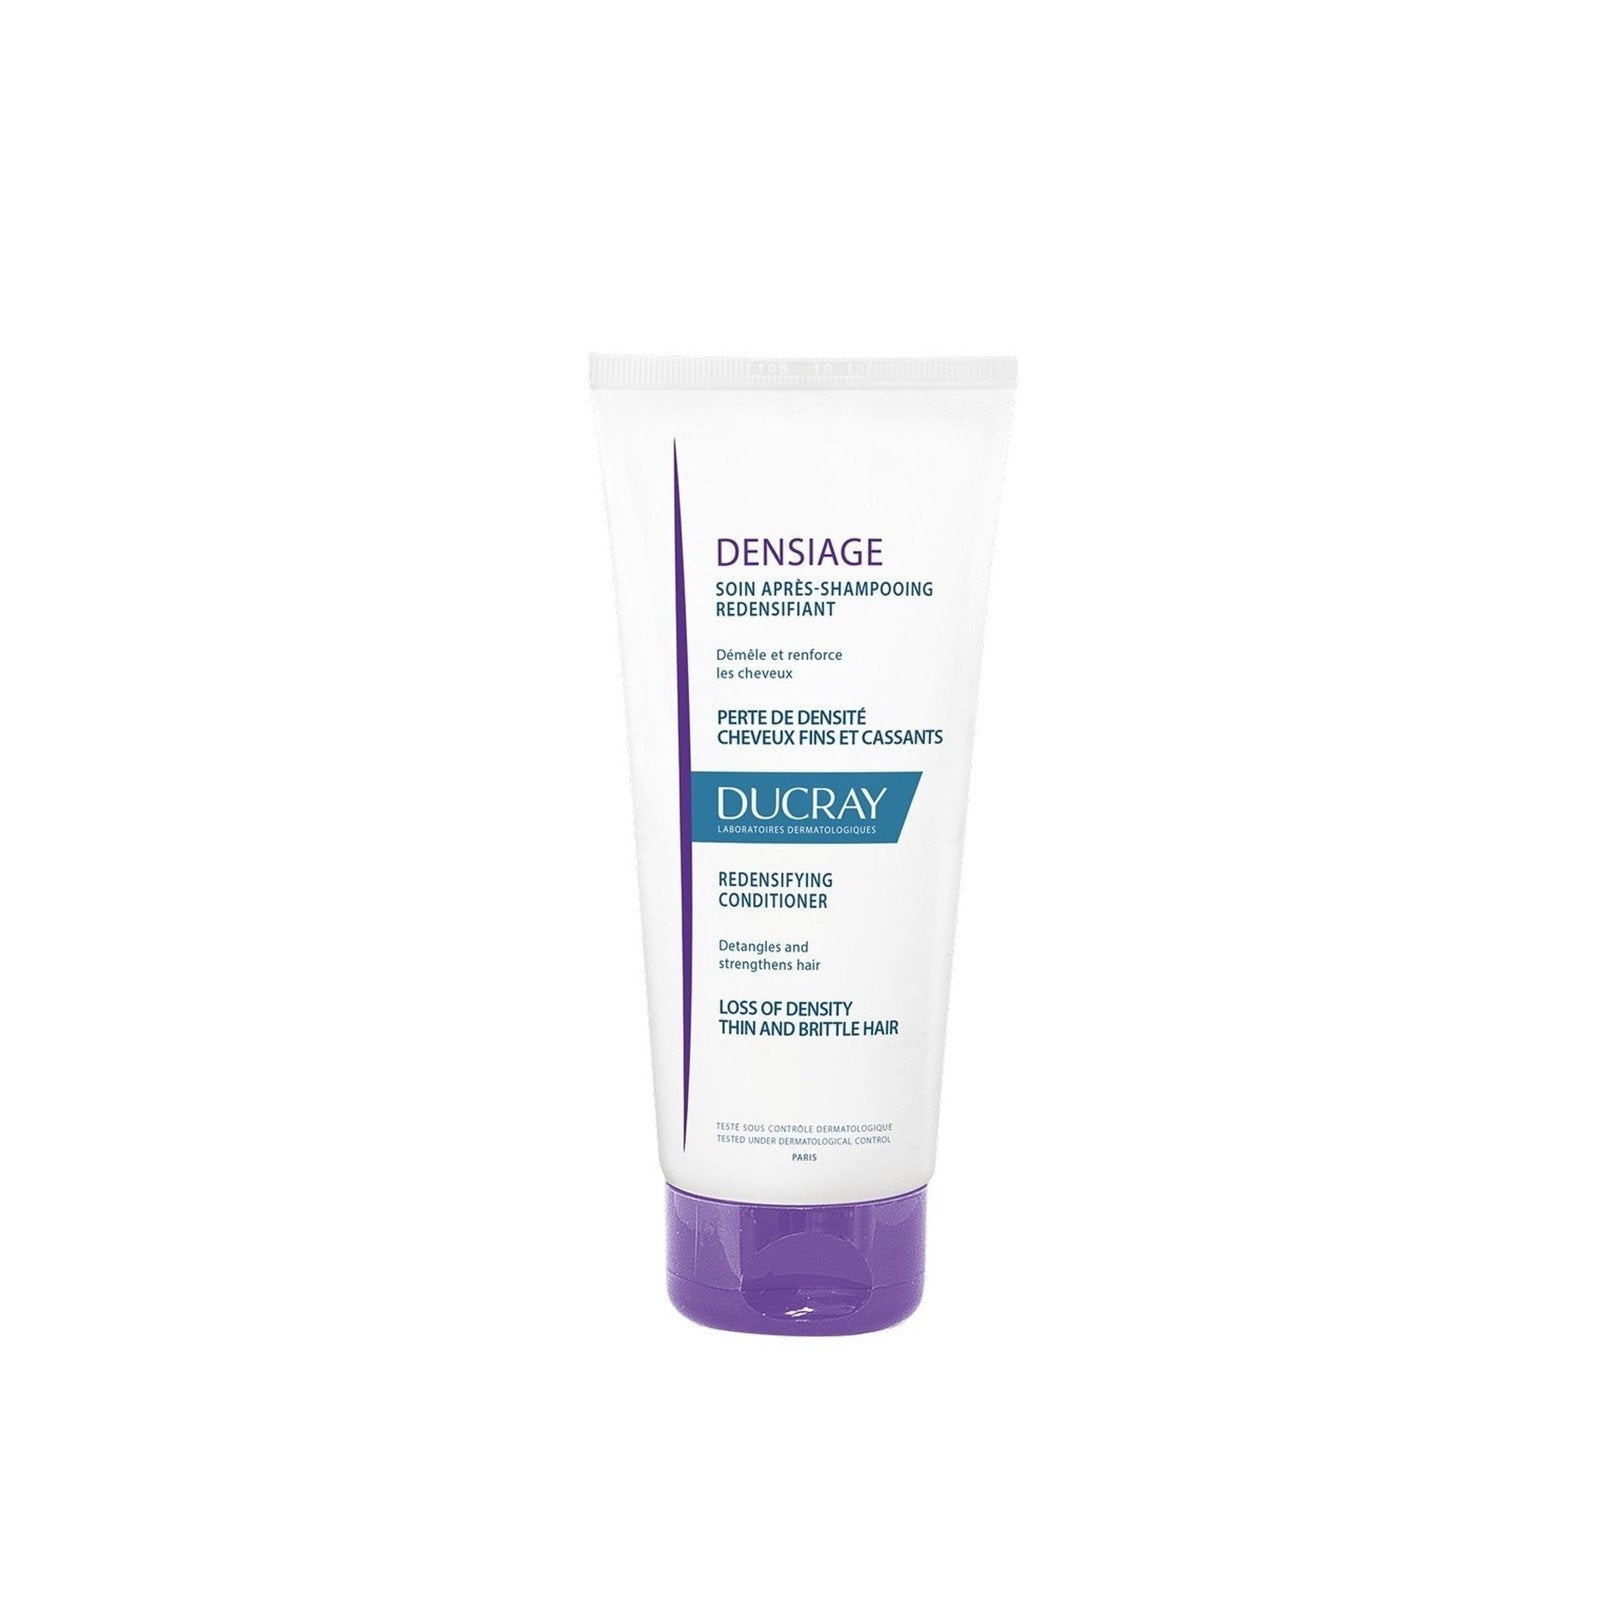 Ducray Densiage Après-Shampooing Redensifiant 200 ml